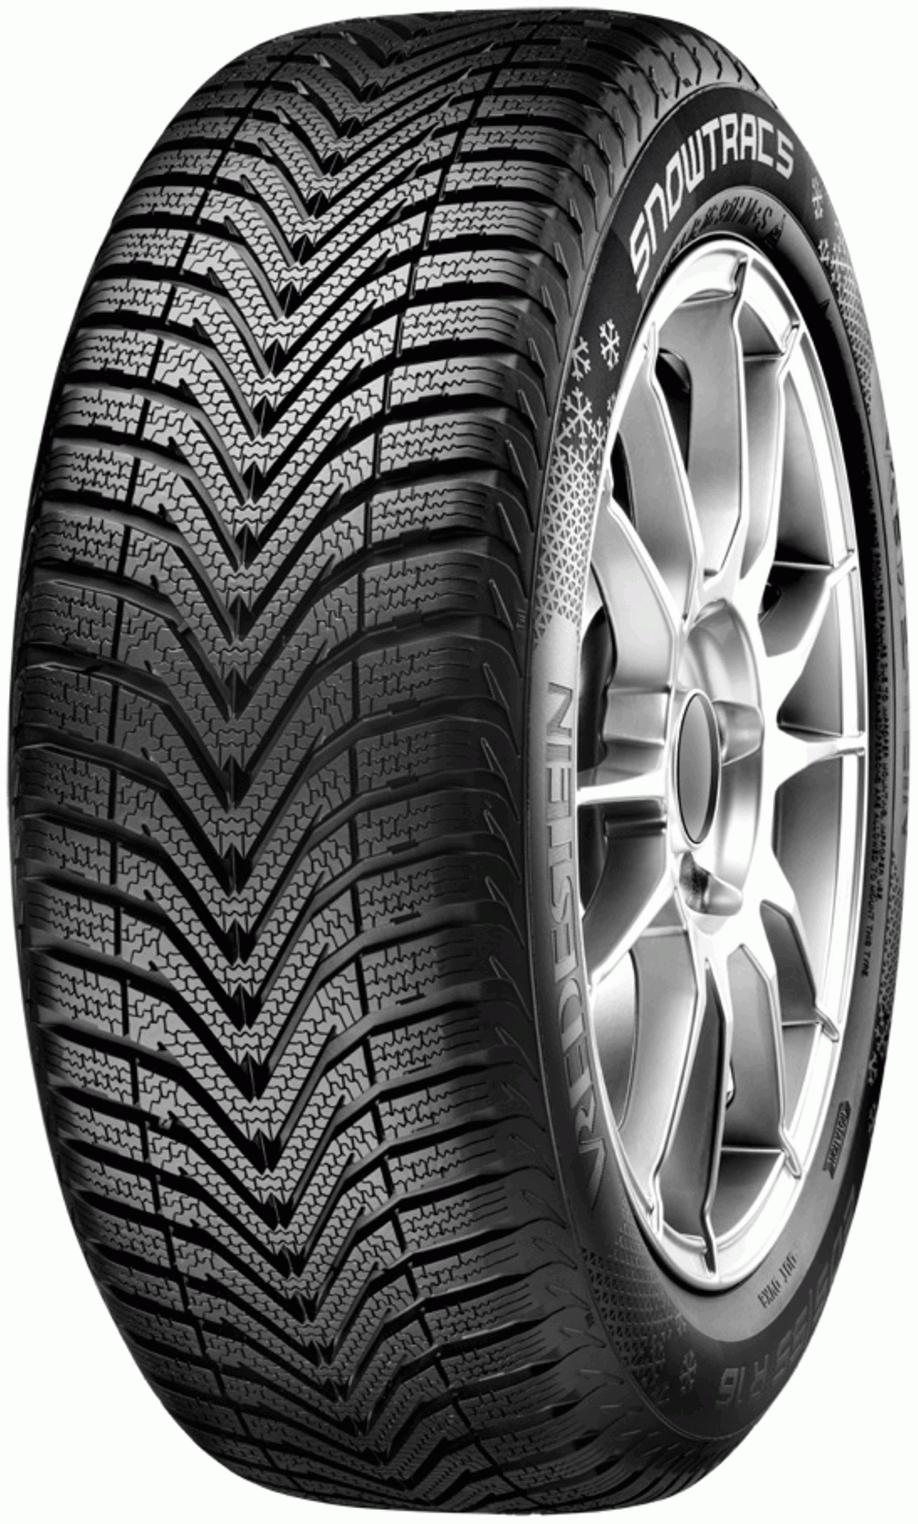 Tyre Tests Vredestein - Snowtrac 5 and Reviews